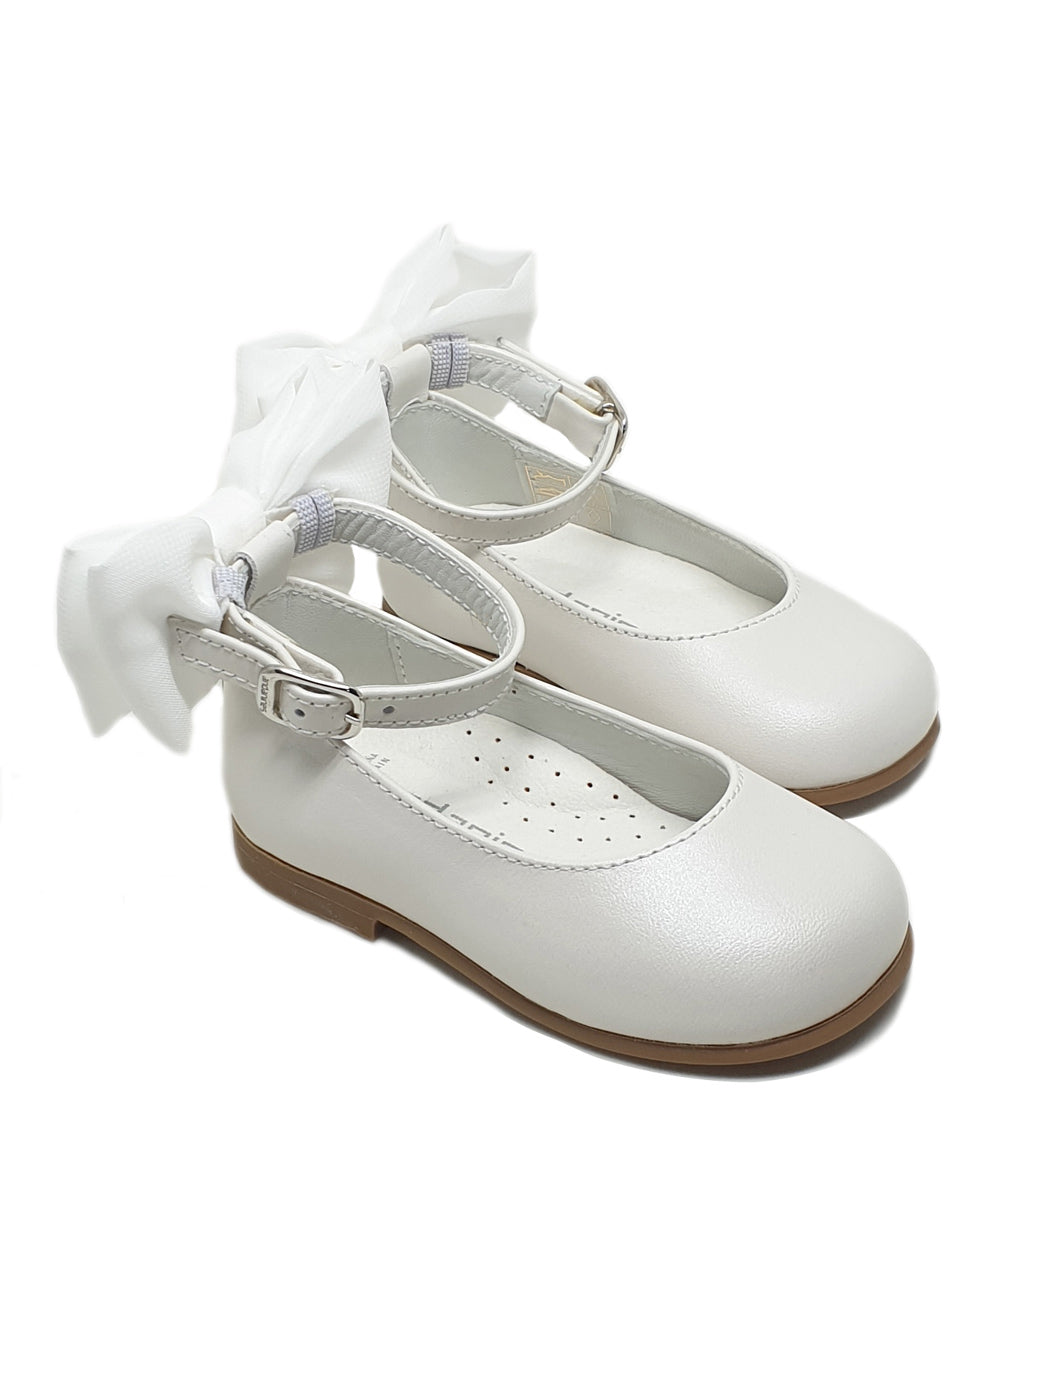 Kid's Ballerina Leather shoe with Bow-191075-15